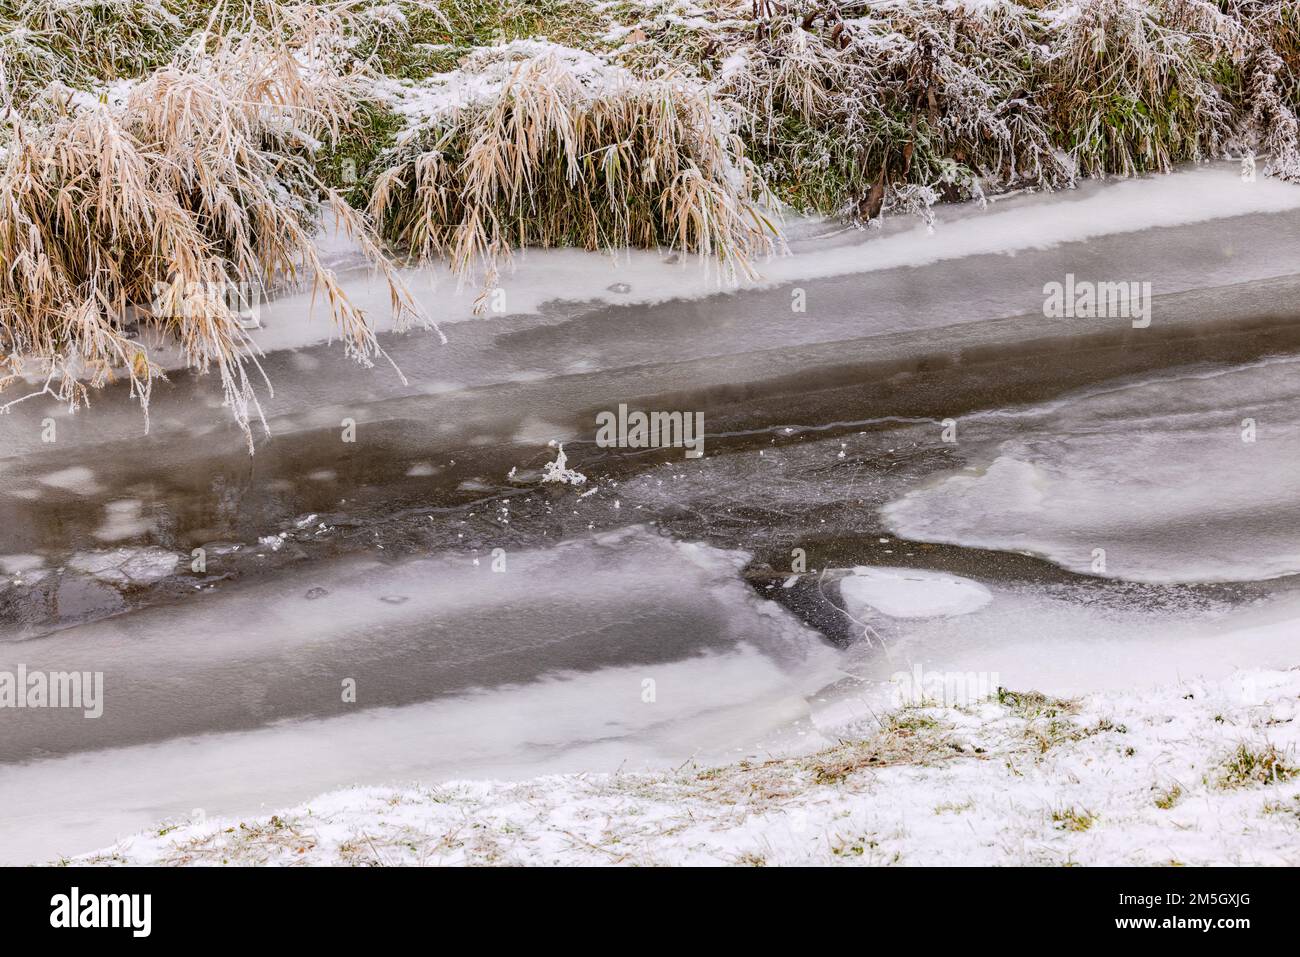 A completely frozen stream with ice and snow in winter in a rural landscape with grass on the bank, Germany Stock Photo